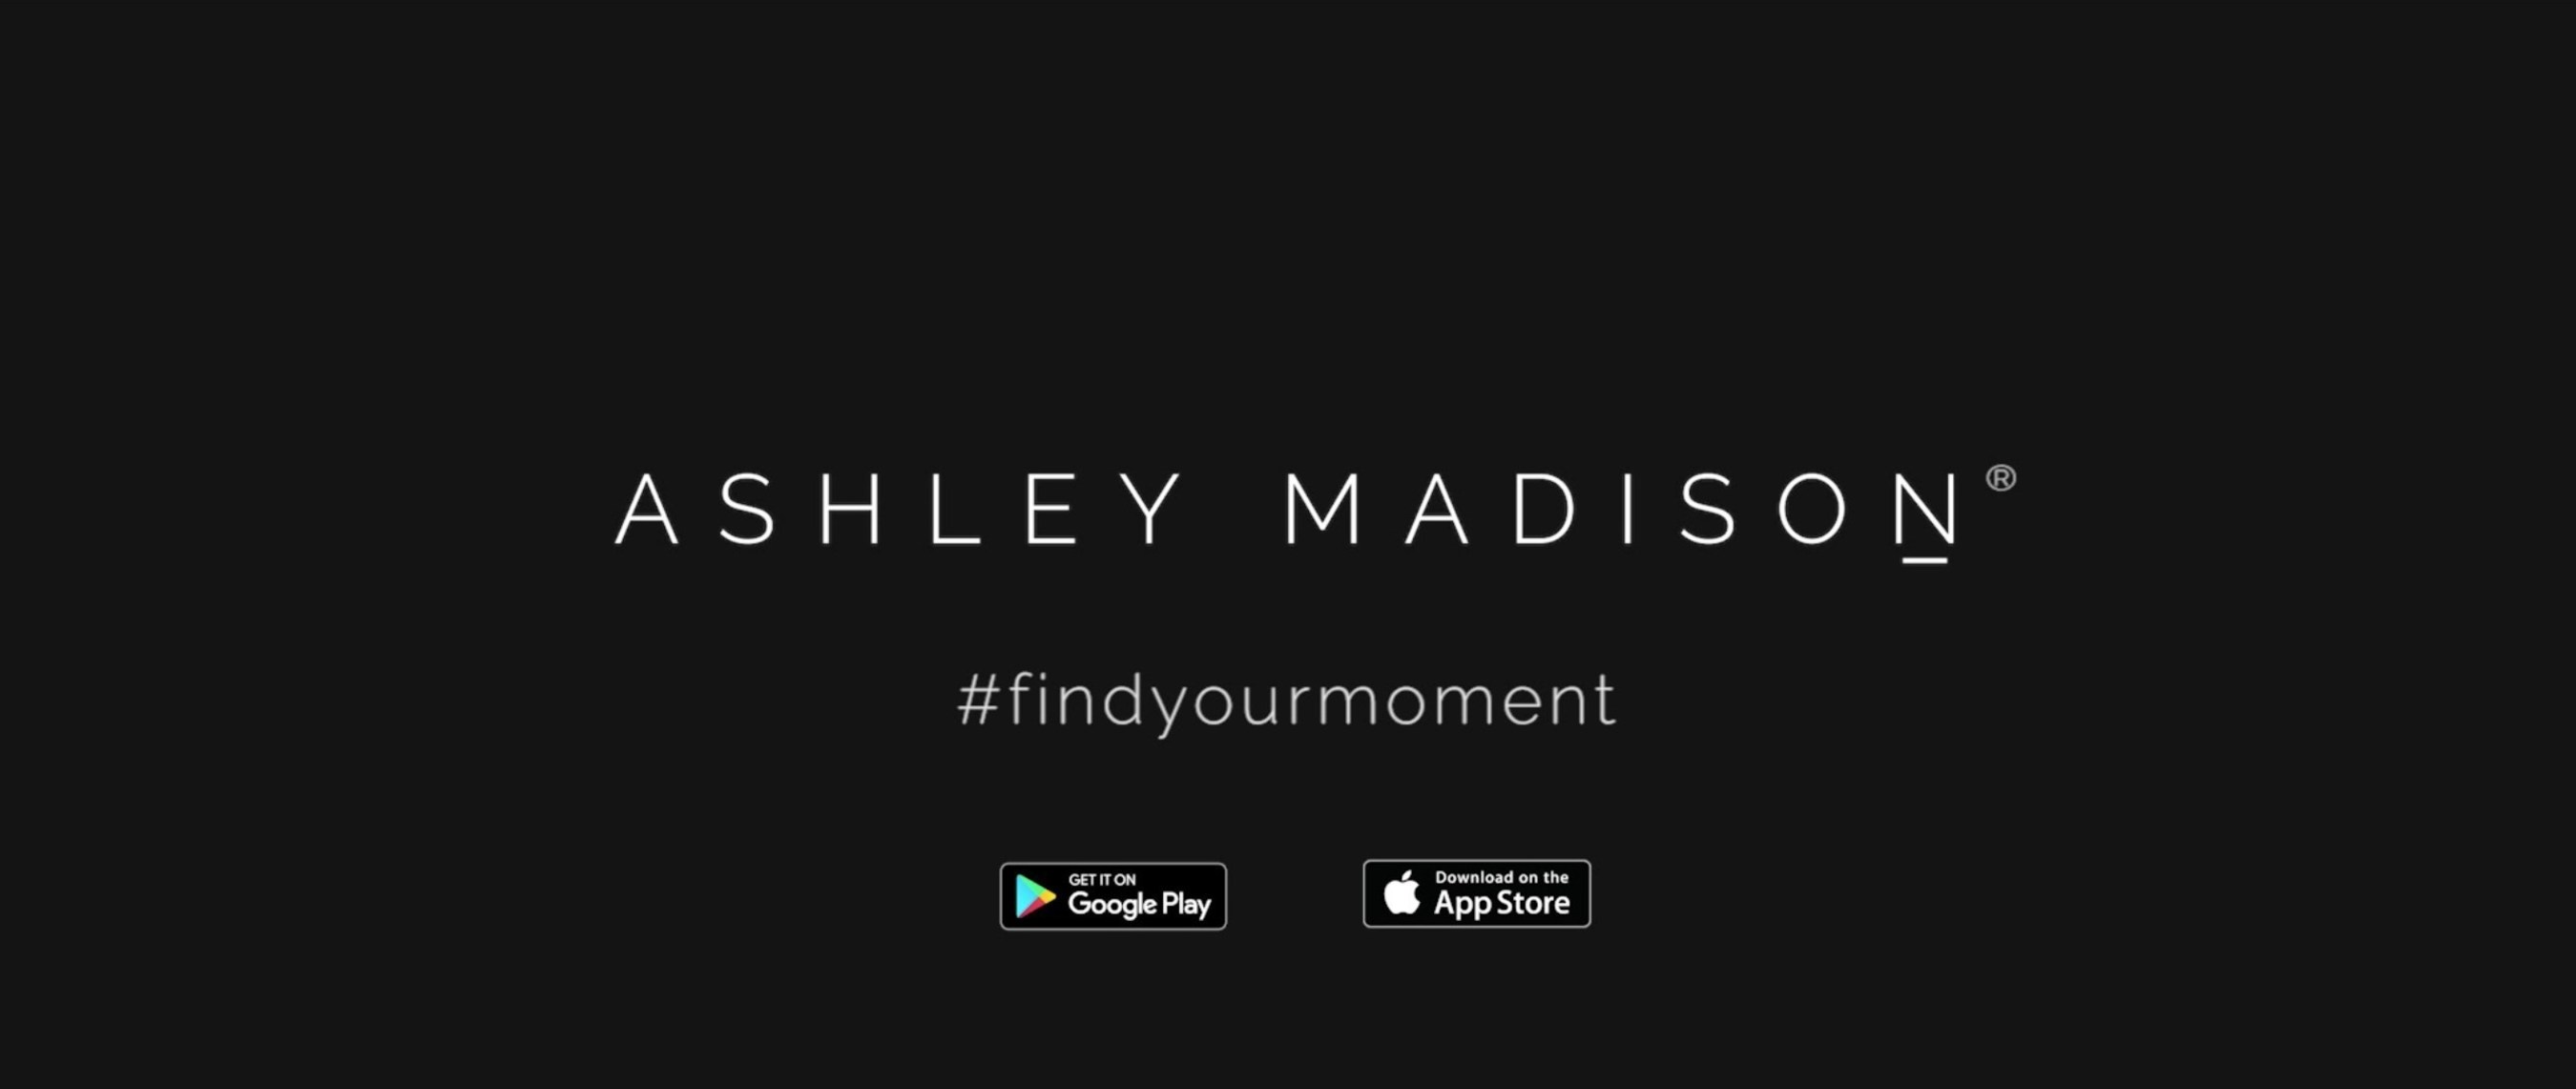 Online dating leader Ashley Madison has dropped its signature tagline 'Life is Short. Have an Affair' in favour of 'Find Your Moment'.